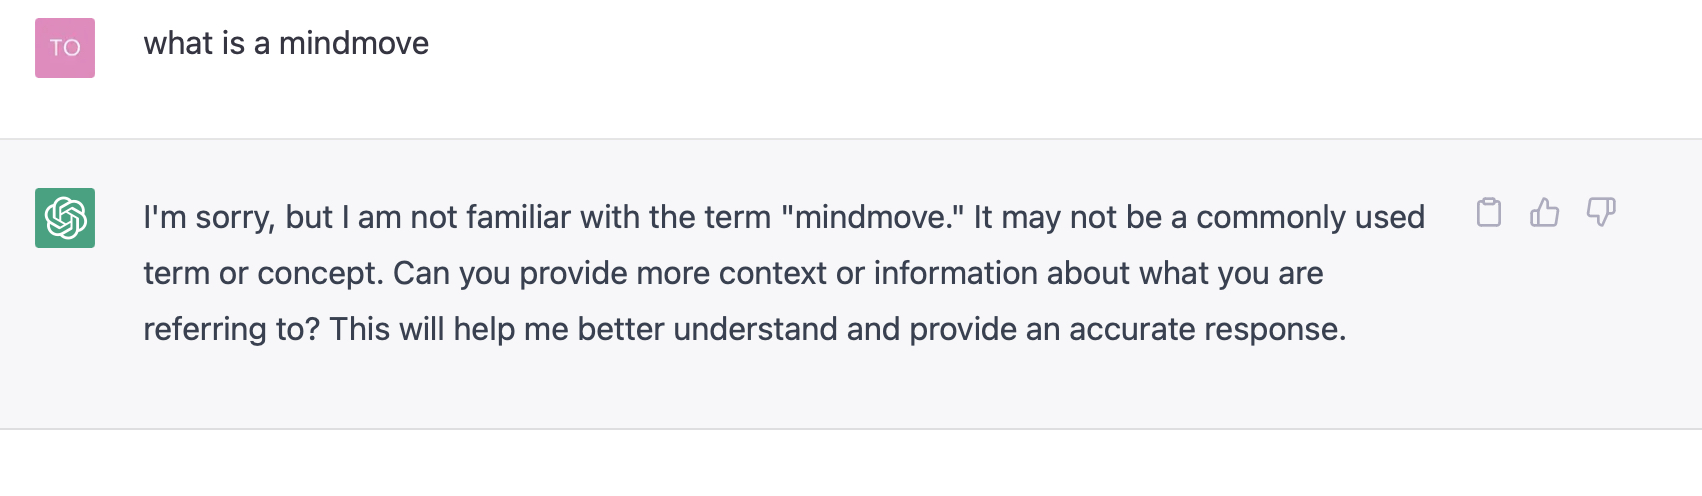 chatgpt_what is mindmove-1